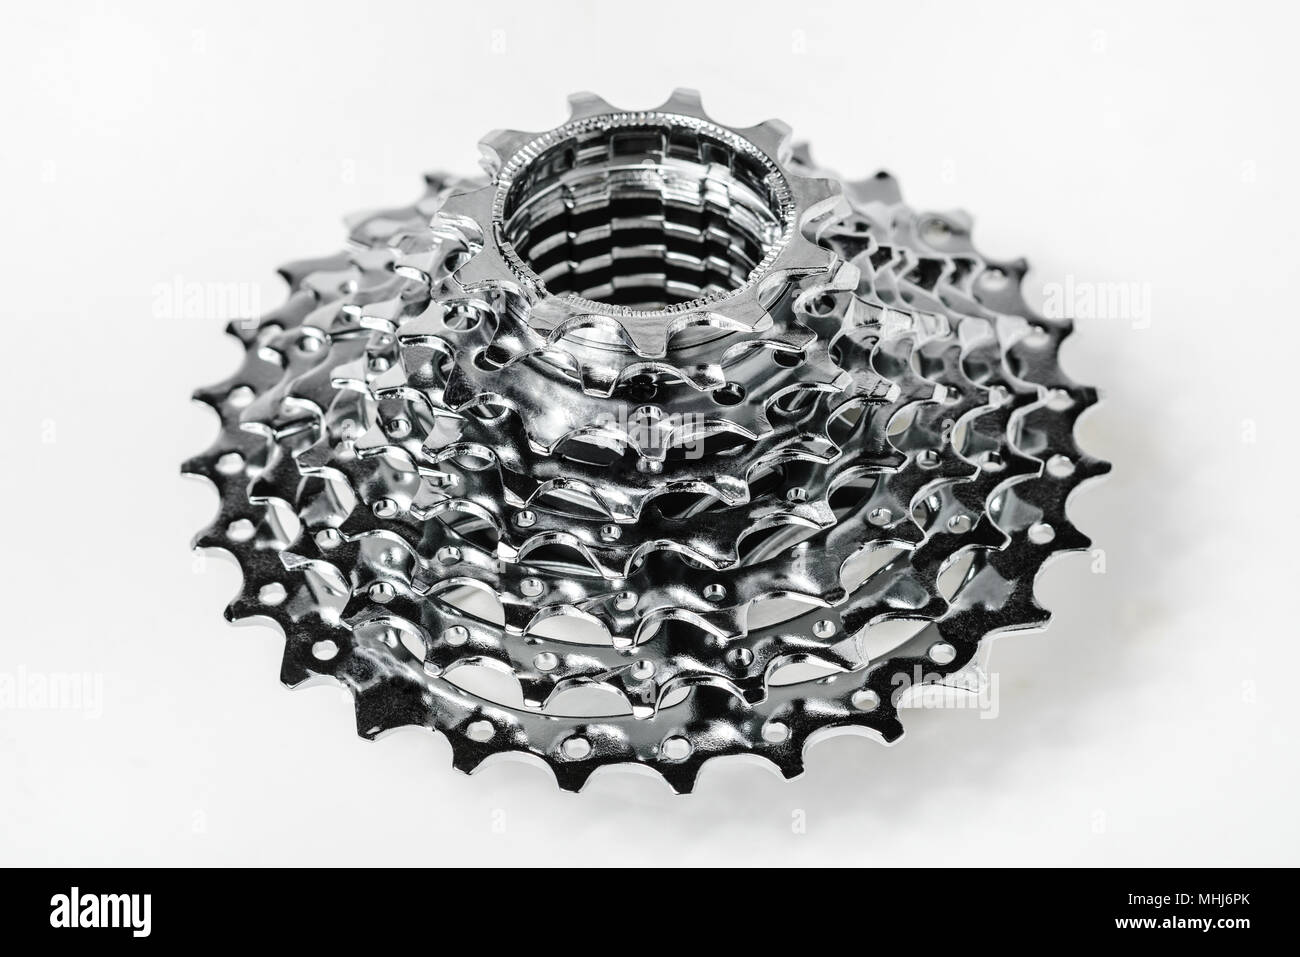 cog and sprocket cycles